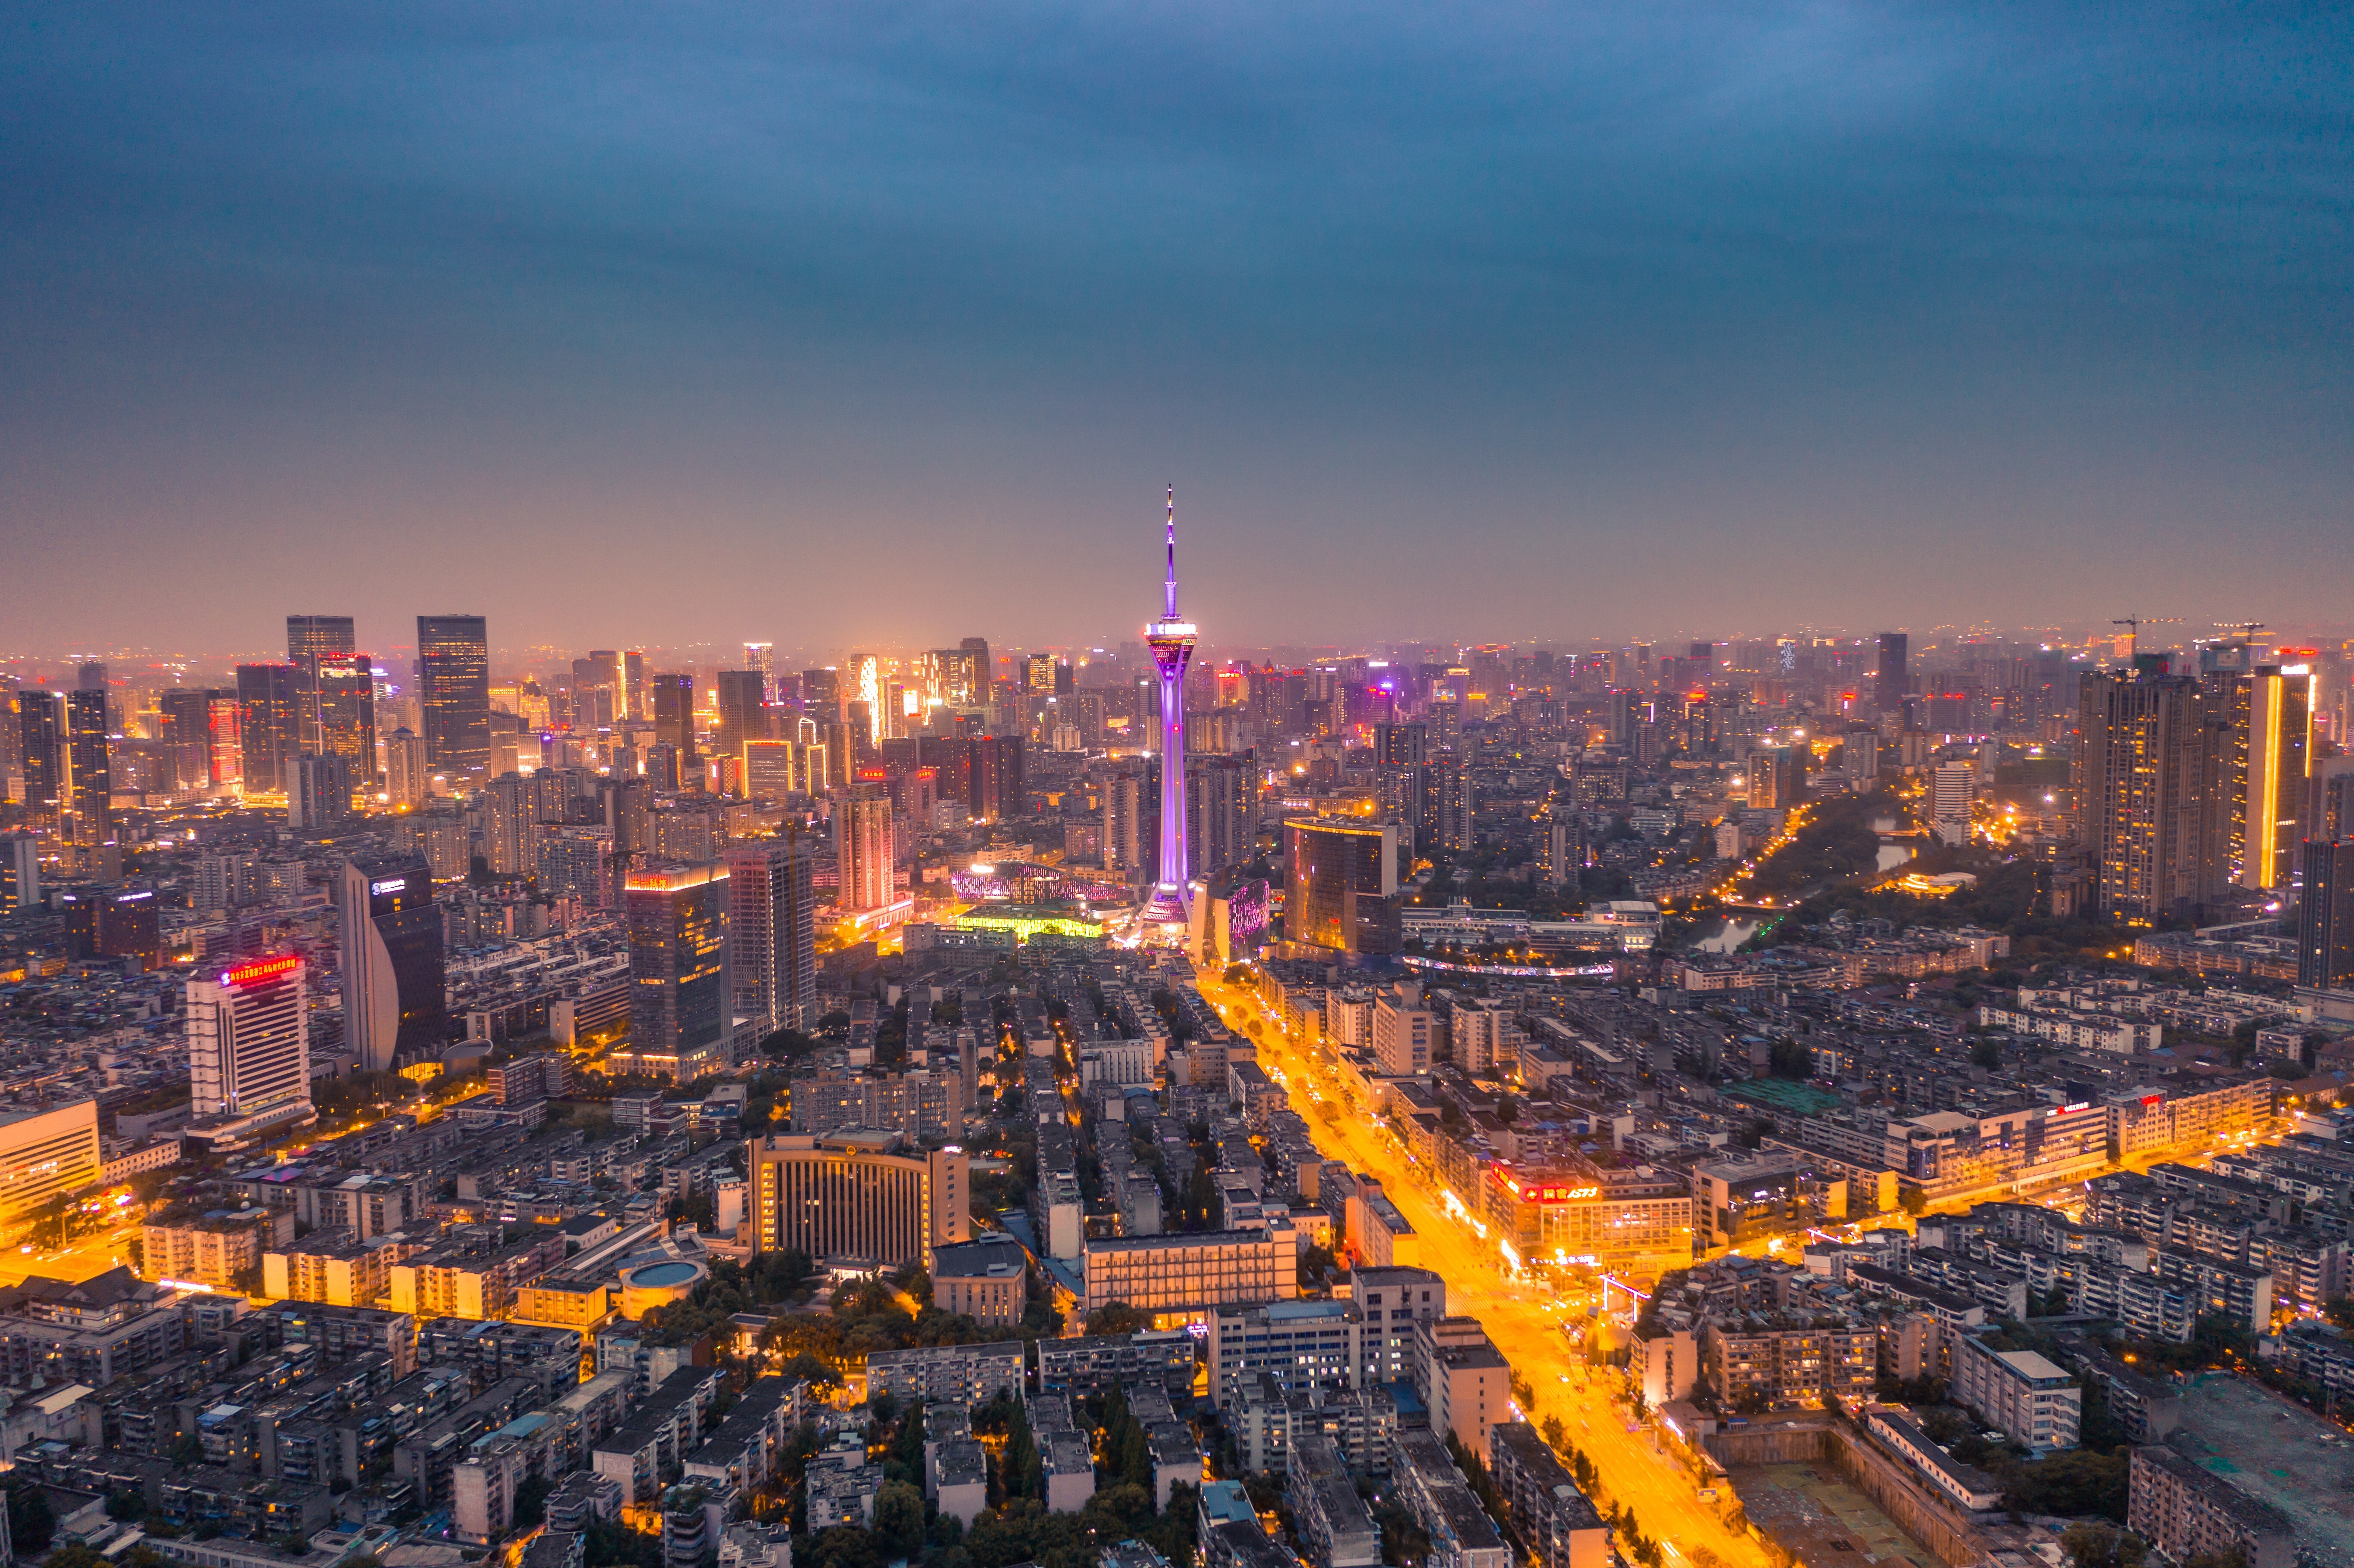 AmCham Southwest, a non-profit based in the city of Chengdu and representing over 300 member companies, was established in 1996. Photo: Shutterstock